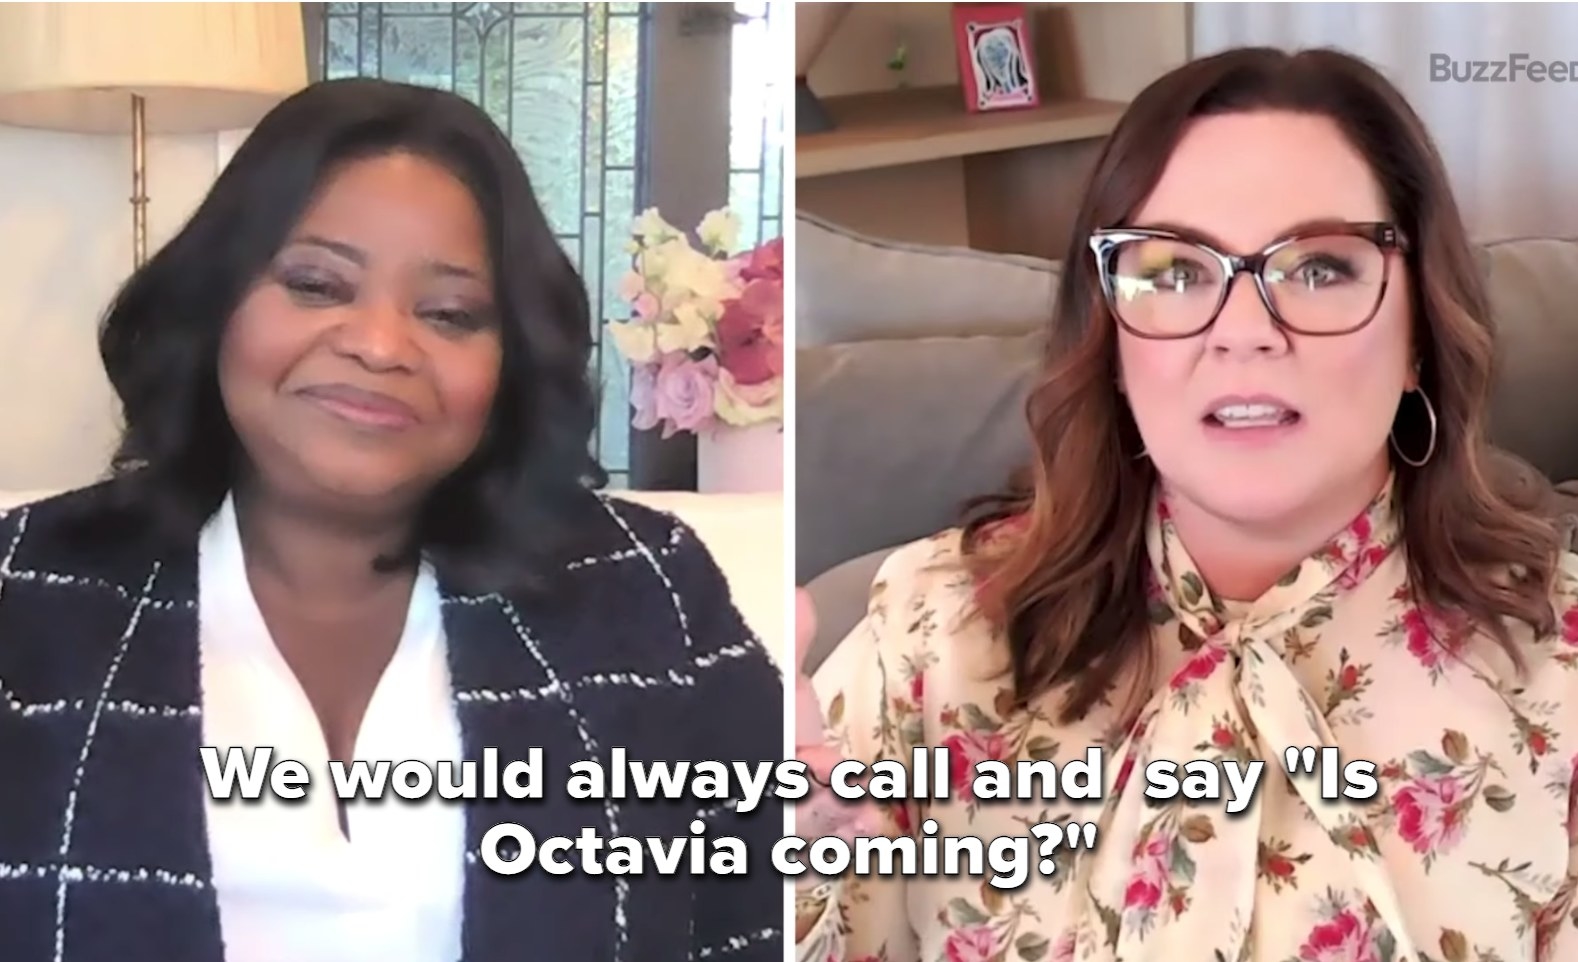 Melissa talking about wanting to know if Octavia was coming to her shows